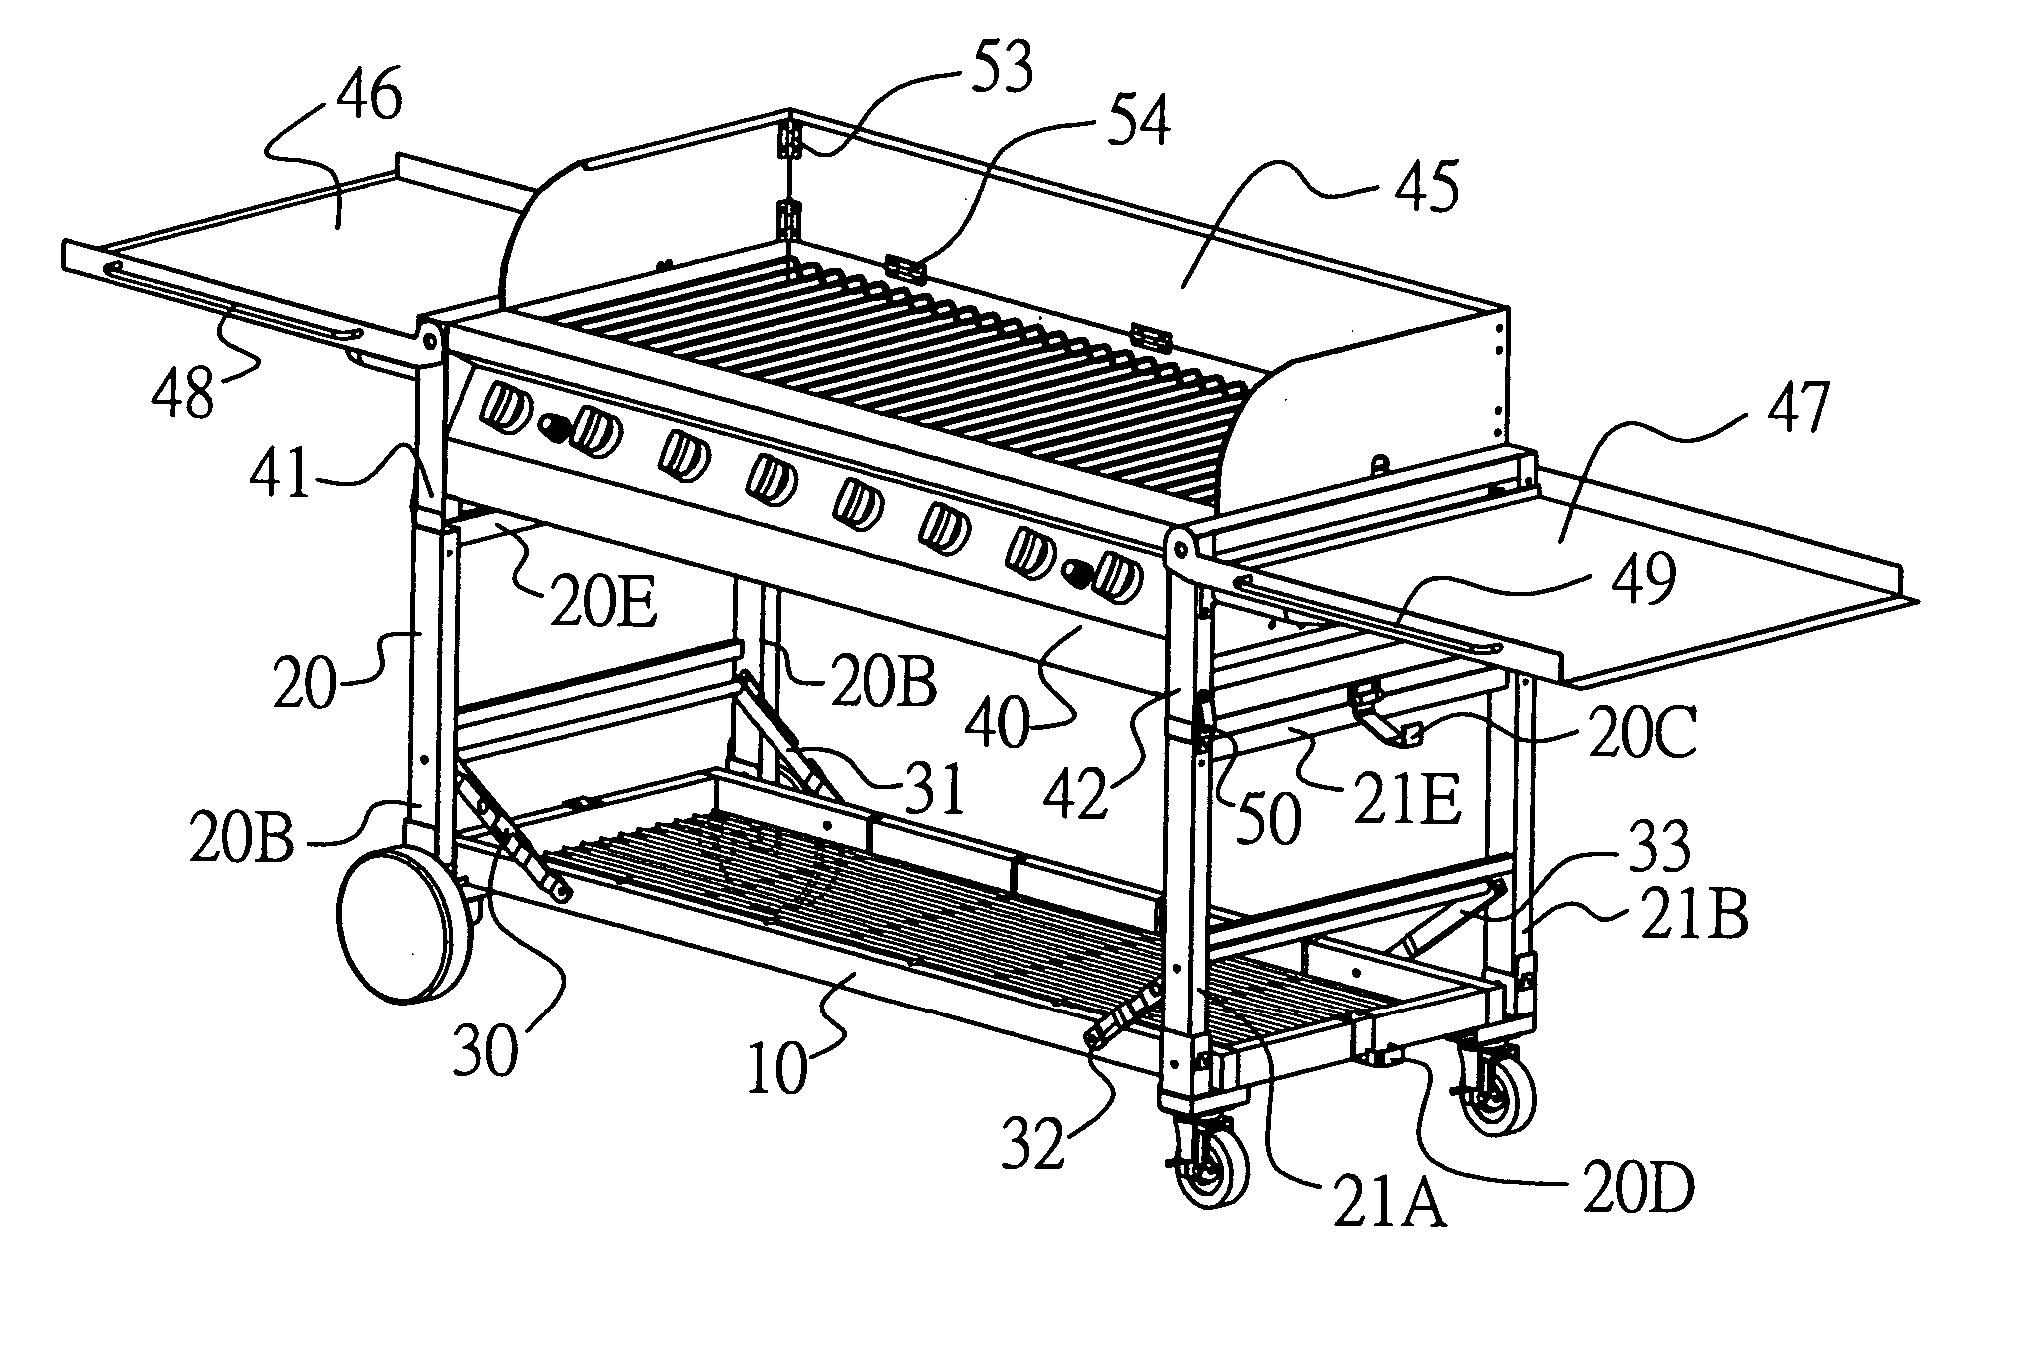 Foldable barbecue grill